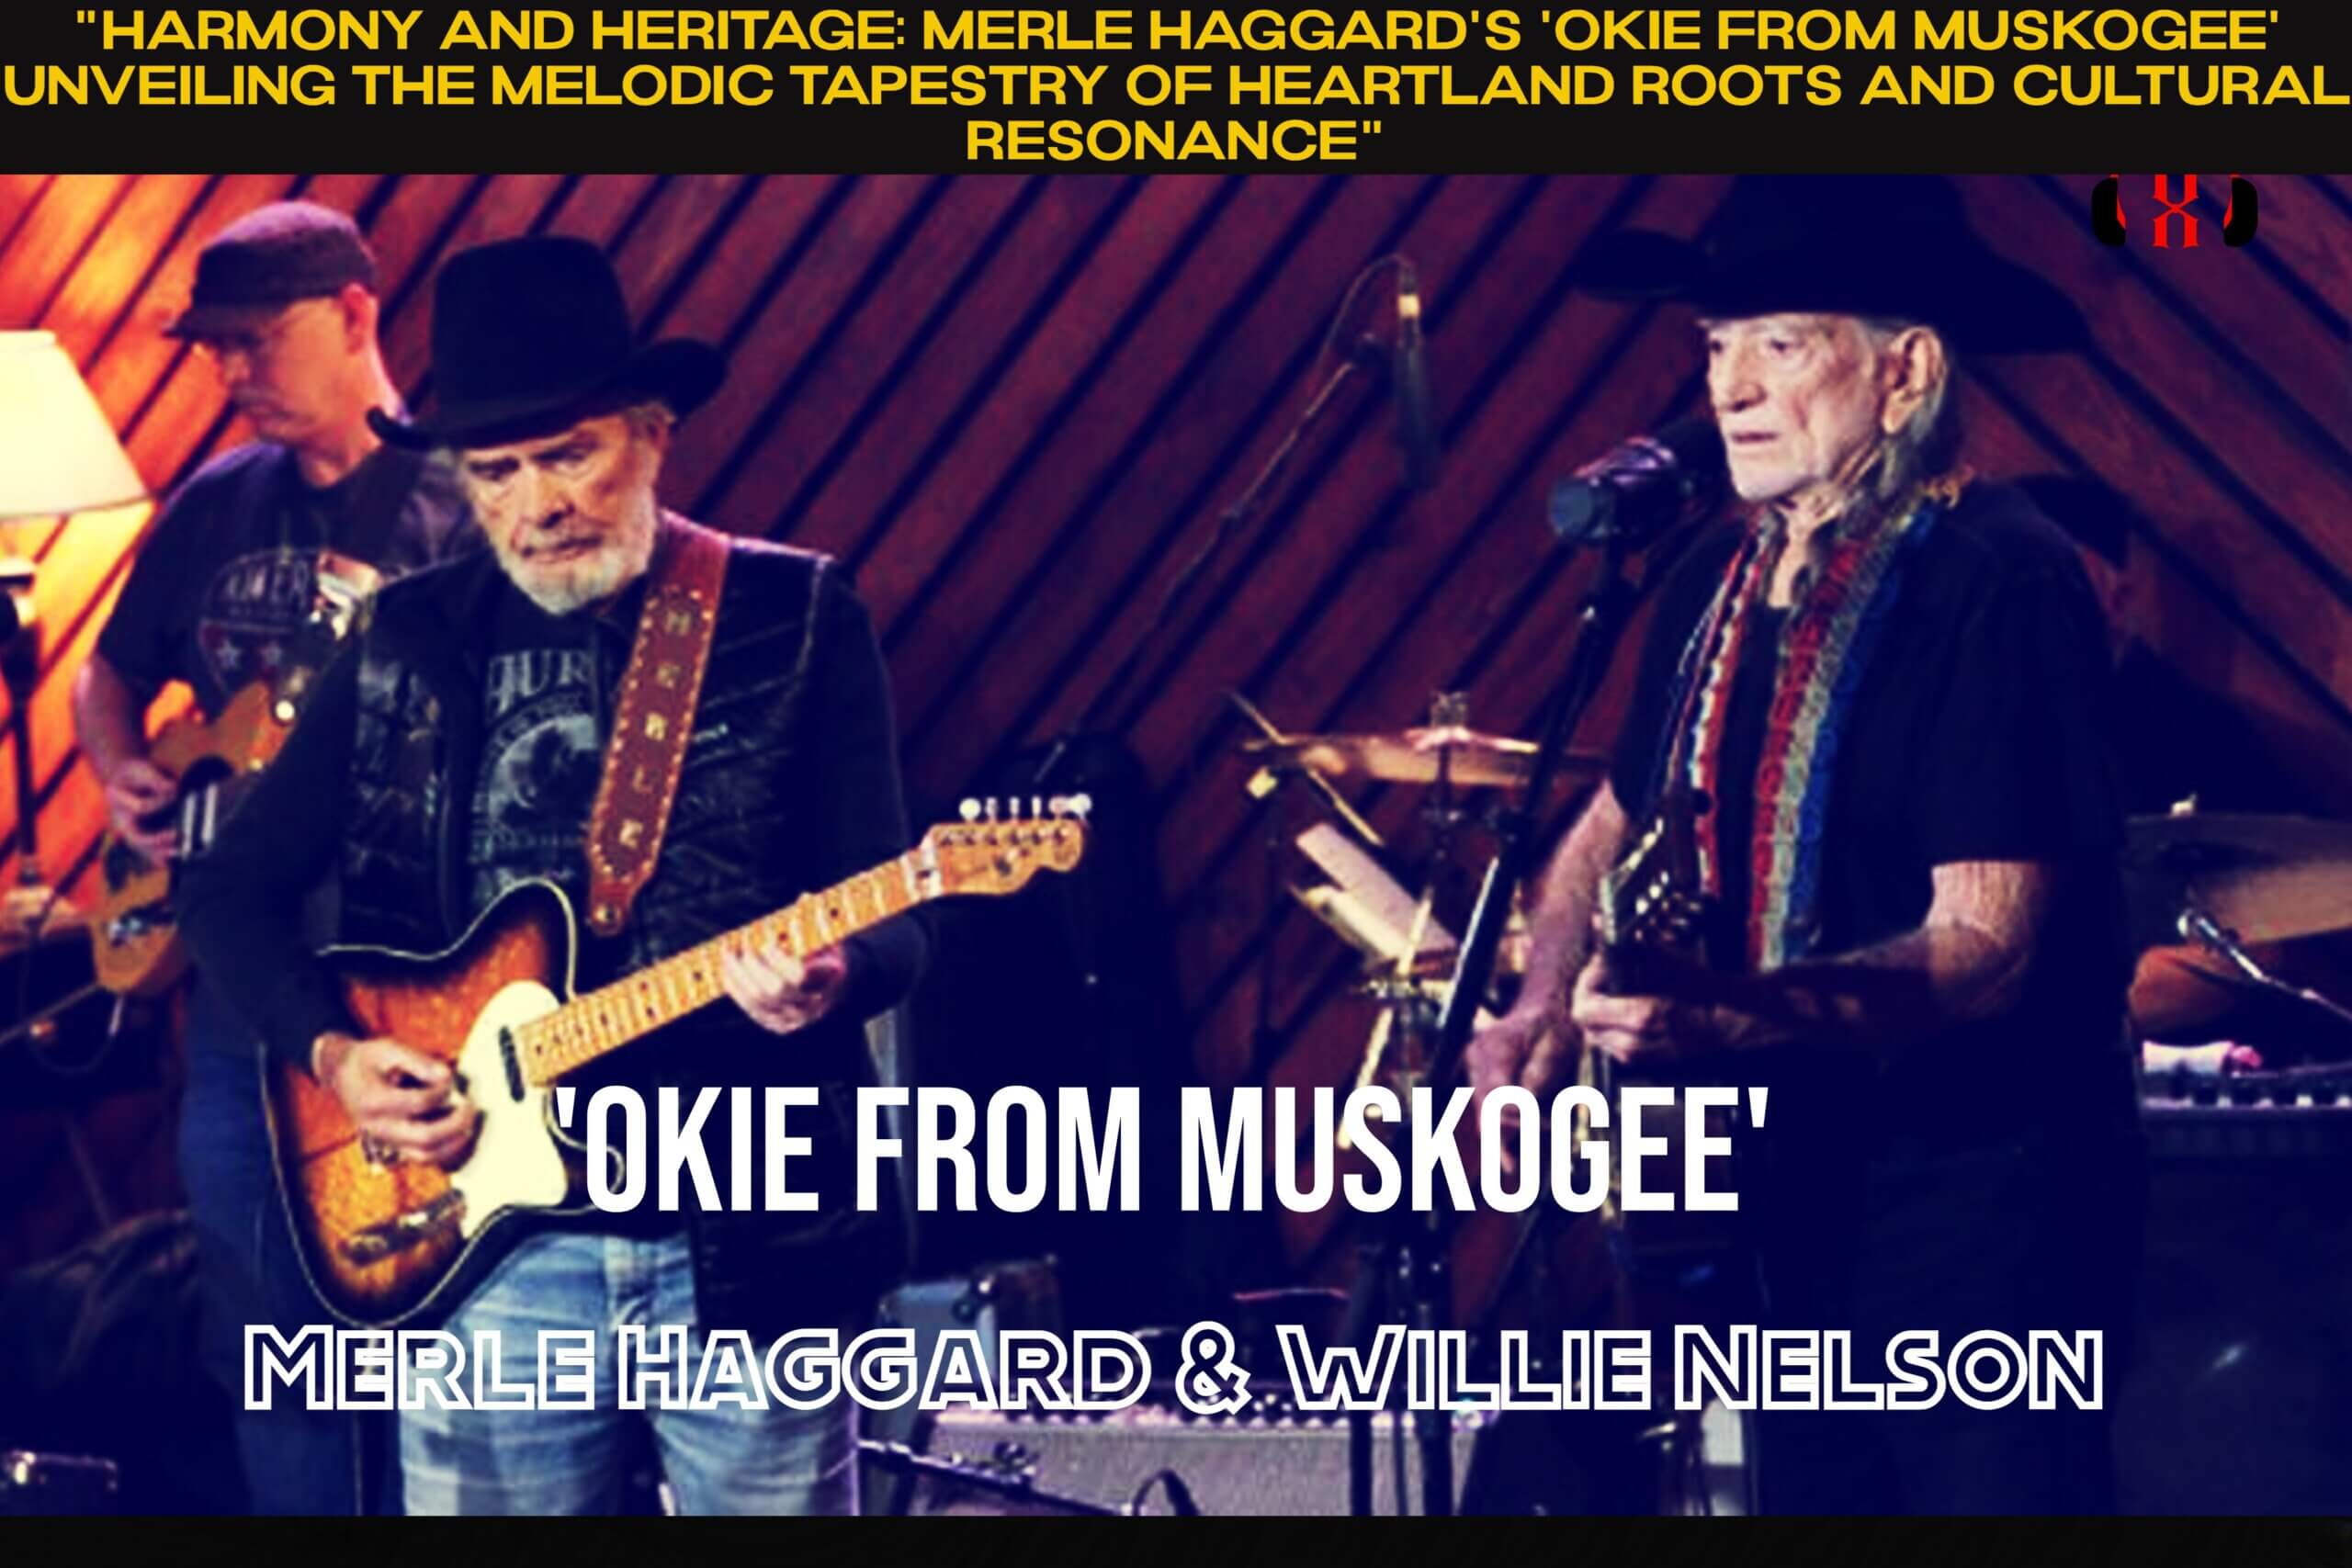 "Harmony and Heritage: Merle Haggard's 'Okie From Muskogee' Unveiling the Melodic Tapestry of Heartland Roots and Cultural Resonance"